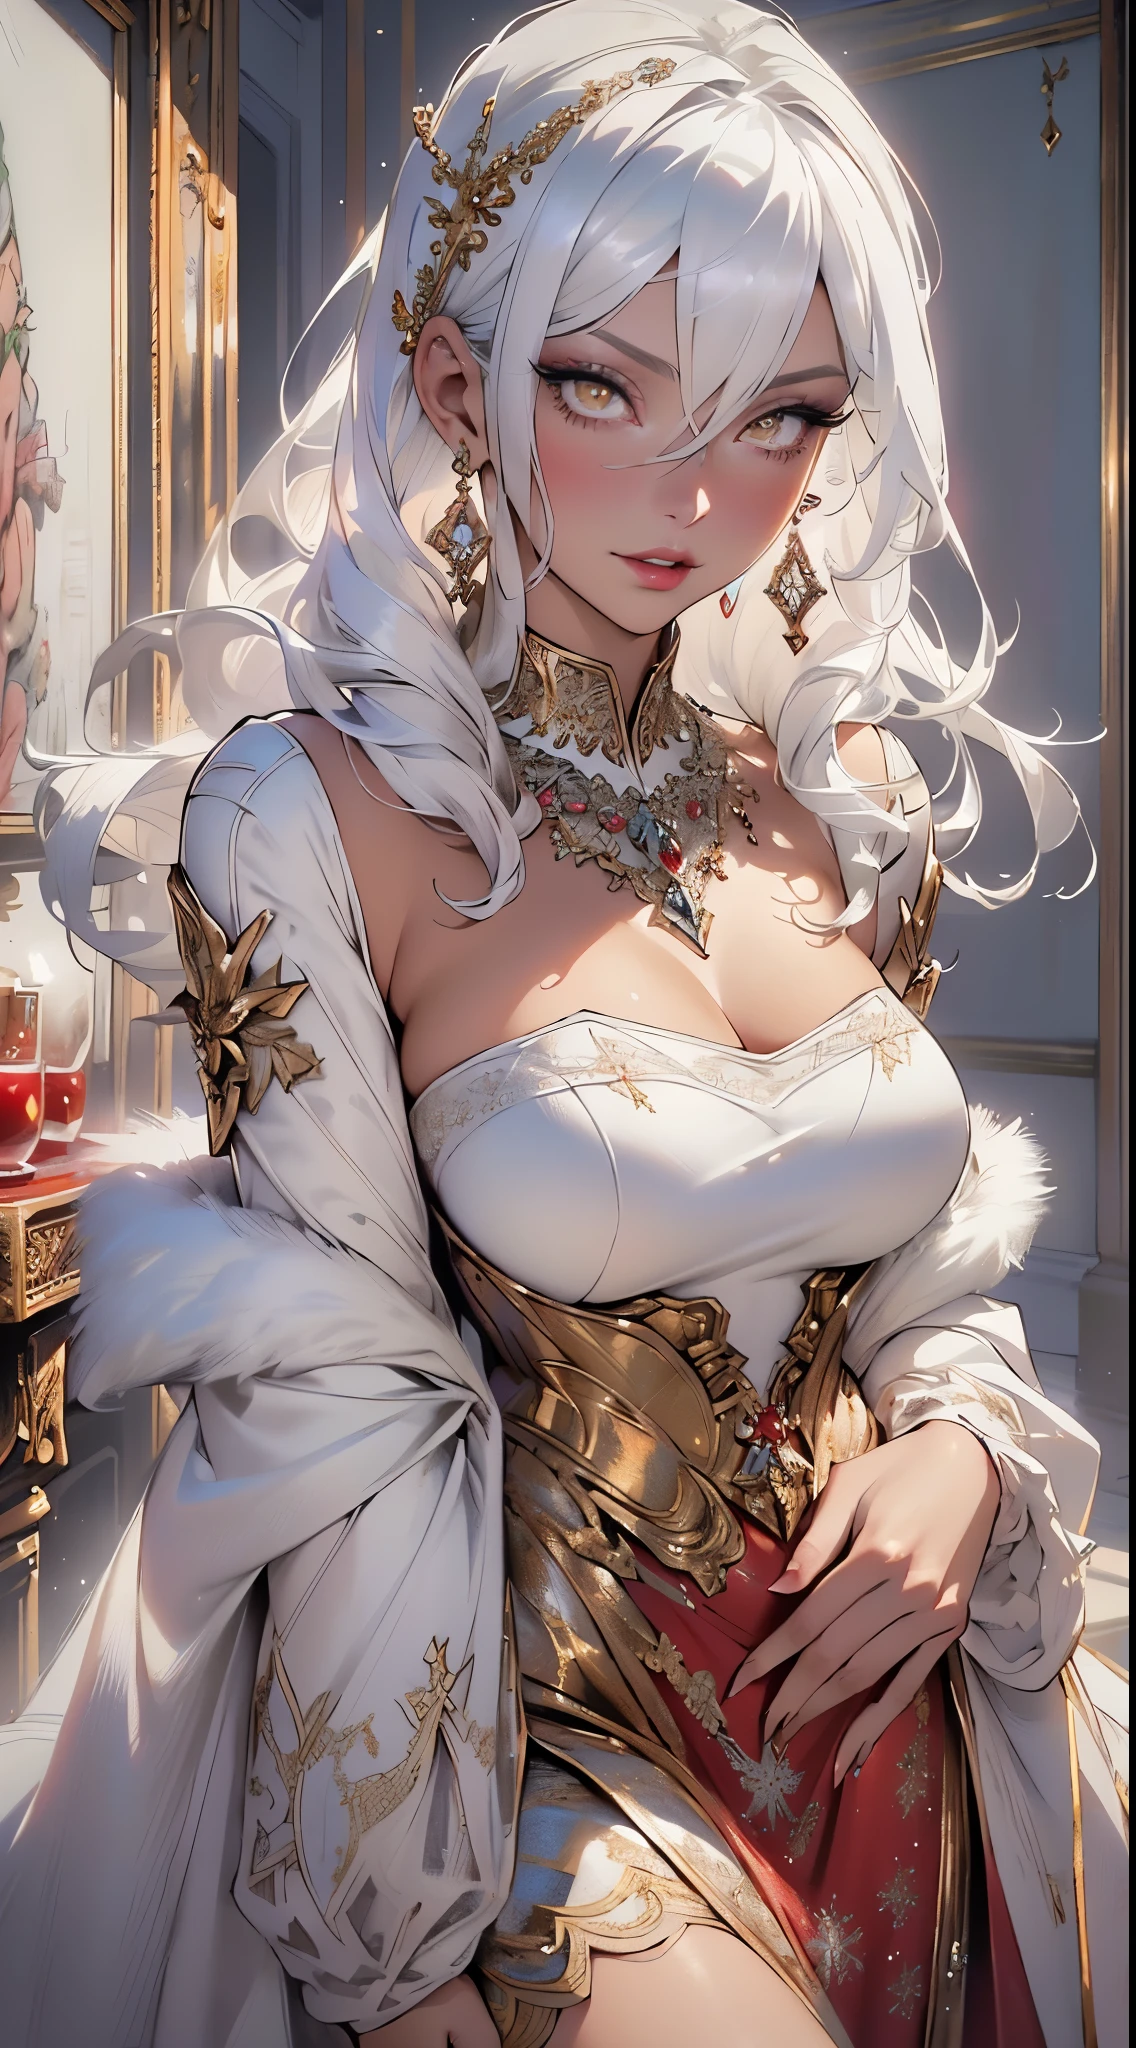 woman,1female,((milf,mom,mature,mature woman,45 years old female,adult)),(large breasts:1.5),saggy breasts,(((white hair:1.4,straight hair,long hair:1.4,colored inner hair))),((yellow_eyes:1.3)),intricate eyes,beautiful detailed eyes,symmetrical eyes,((((dark skin:1.4,lustrous skin:1.5,bright skin: 1.5,skin tanned,shiny skin,very shiny skin,shiny body,illuminated skin)))),(spider lower abdomen,narrow waist,wide hip,bimbo body,inflated legs,thick thighs,delicate detailed fingers),(((detailed face))),

cute,slutty,sensual,seductive look,seductive,((erotic)),opulent,sumptuous,longingly,((nsfw)),

queen,goddess,fantasy,(beautiful winter silver clothes,silver silk),((strapless red dress,very long red skirt,red dress)),(silver clothes),(((ice jewelry,intricate necklace,christmas jewelry,detailed outfit))),cleavage,silver silk,((eyeshadow,elegant makeup,eyelid makeup,gold lips,gold lipstick)),((Transparent cloth:1.1)), (((Sexy white fur coat, white fur coat outfit, wearing a white fur coat:1.3,winter white coat))),red gloves,(((intricate outfit,intricate clothes,embroidered outfit,ornate outfit,embroidered clothes,ornate clothes))),

(dynamic pose:1.0),embarrassed,(centered,scale to fit dimensions,Rule of thirds),

inside,indoor,((cozy gothic room)),scenery:1.25,((intricate scenery)),((winter decorations)),Christmas tree,

(Glossy winter ornaments),highres,sharp focus,(ultra detailed,extremely detailed),(photorealistic artwork:1.37),(extremely detailed CG unity 8k wallpaper),(((vibrant colors,vibrant theme))),(intricate),(masterpiece),(best quality),